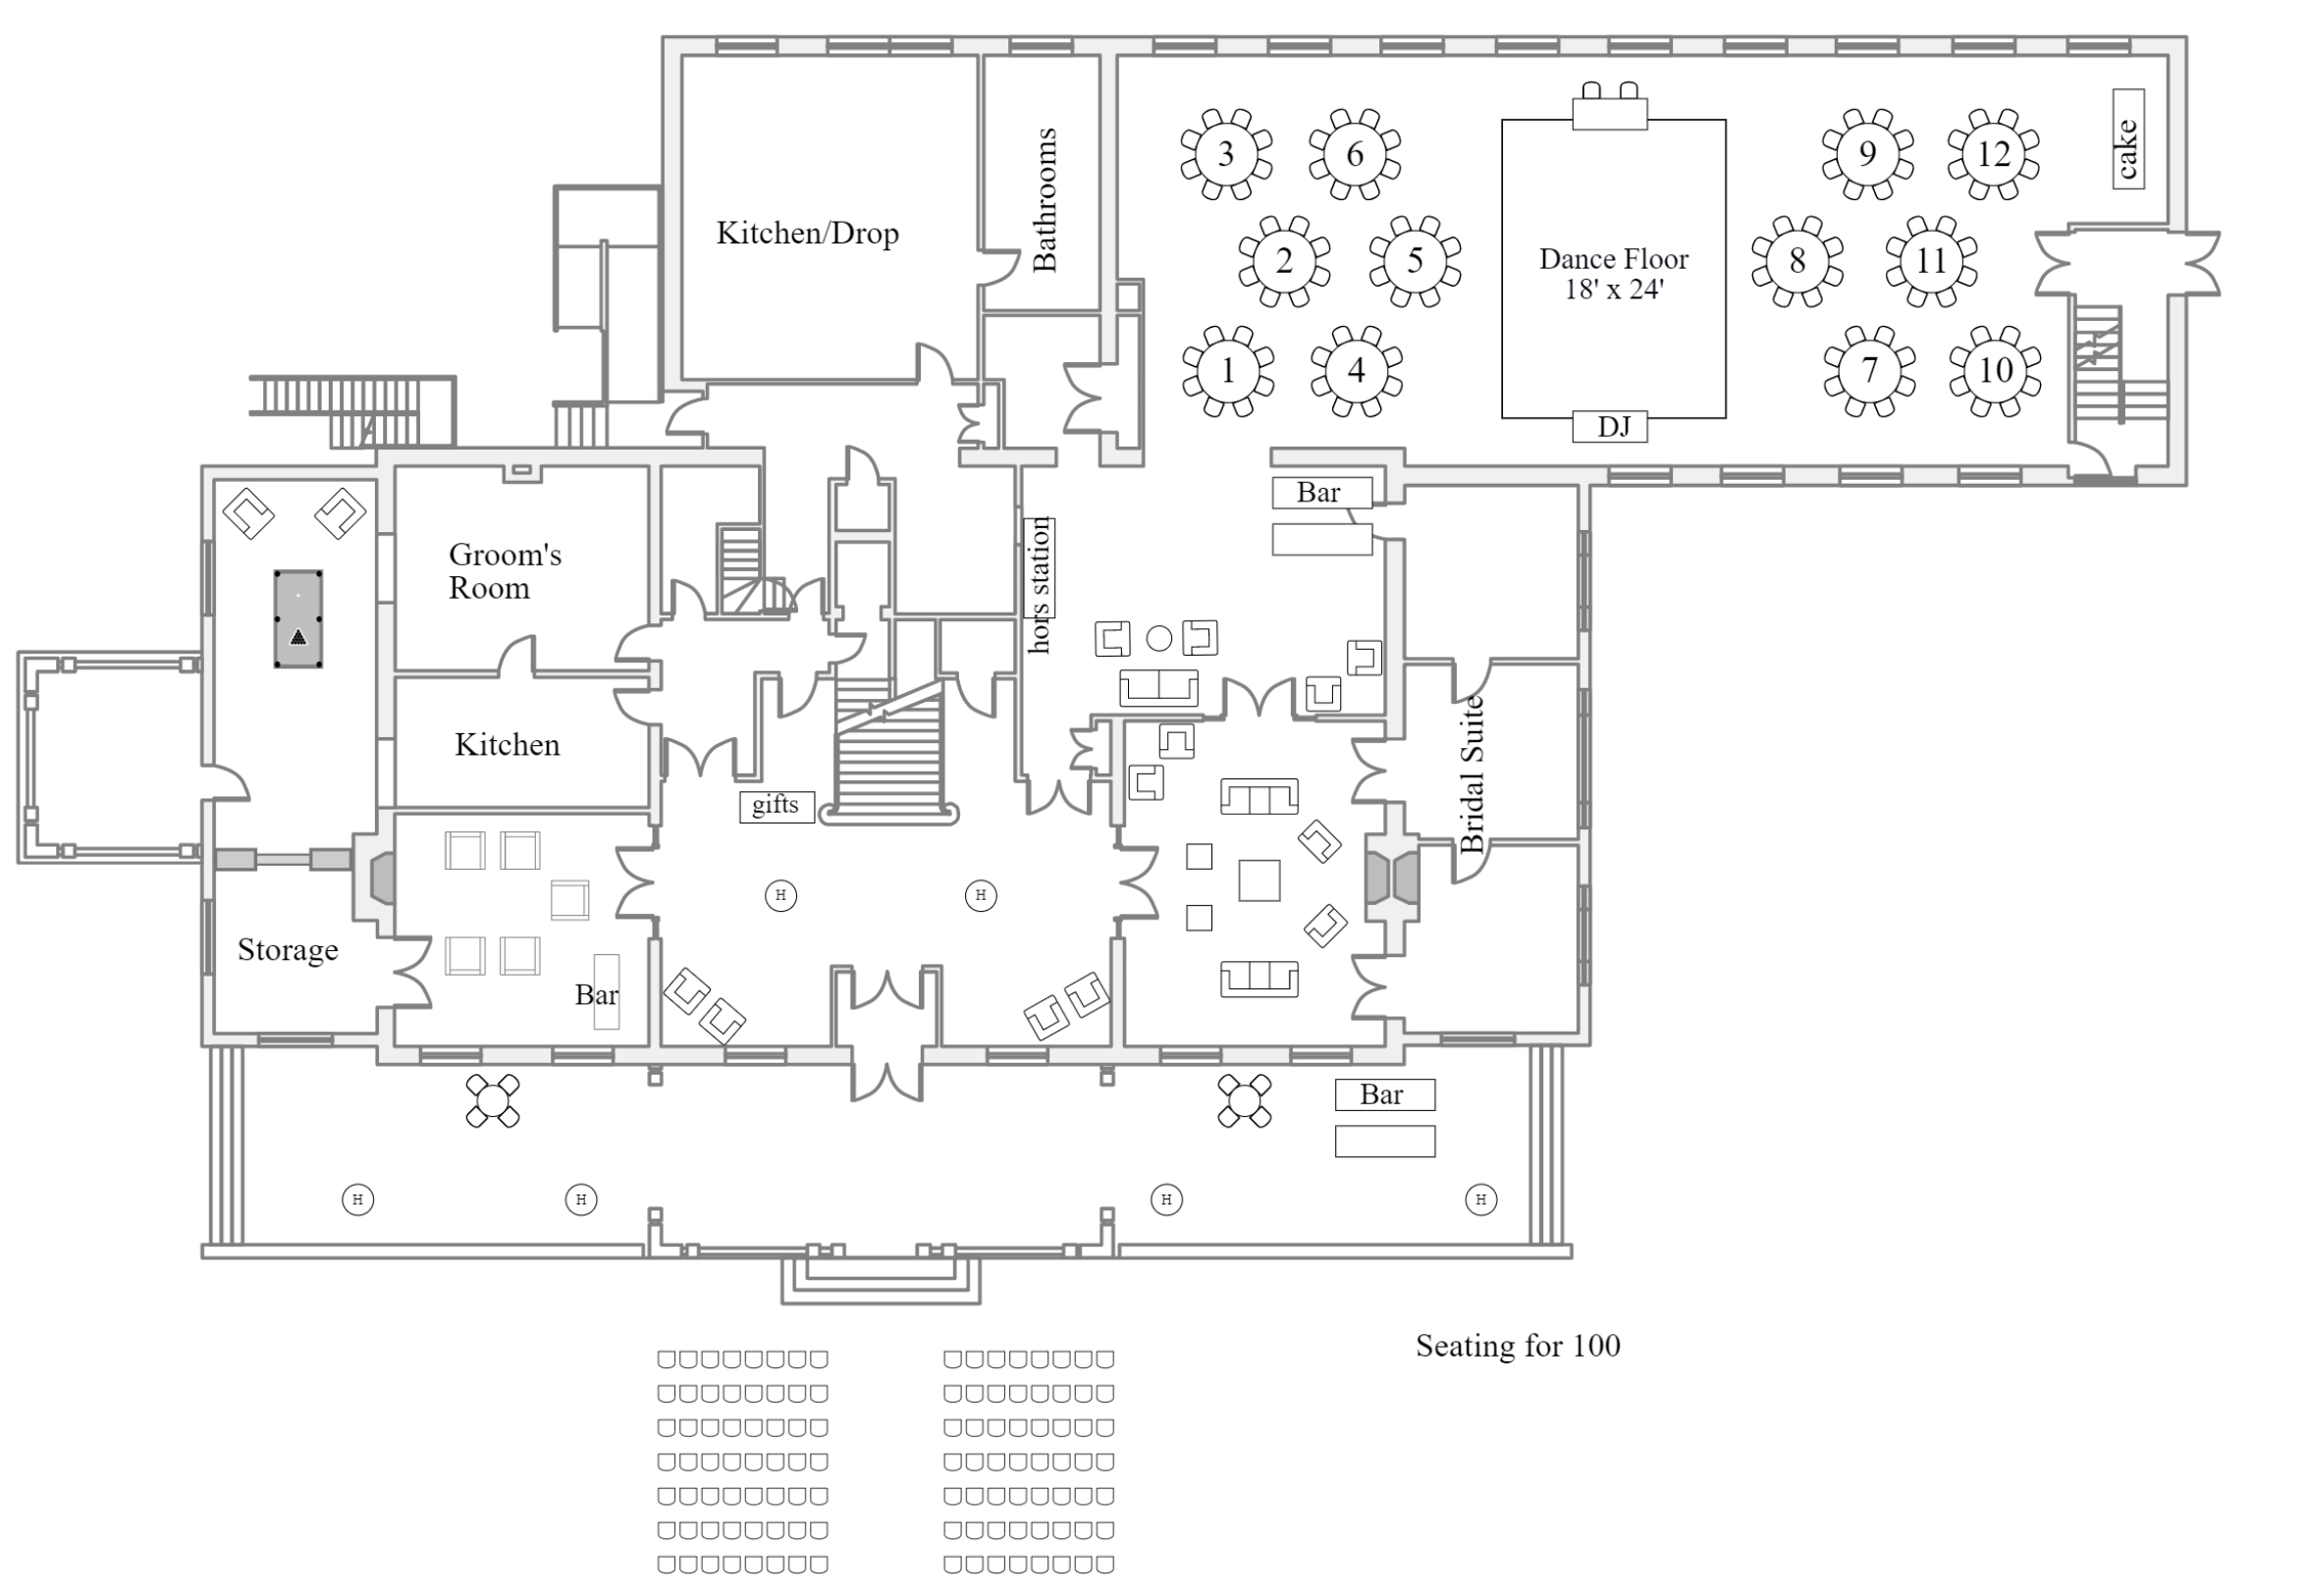 Historic King Mansion Layout for 100 Guests